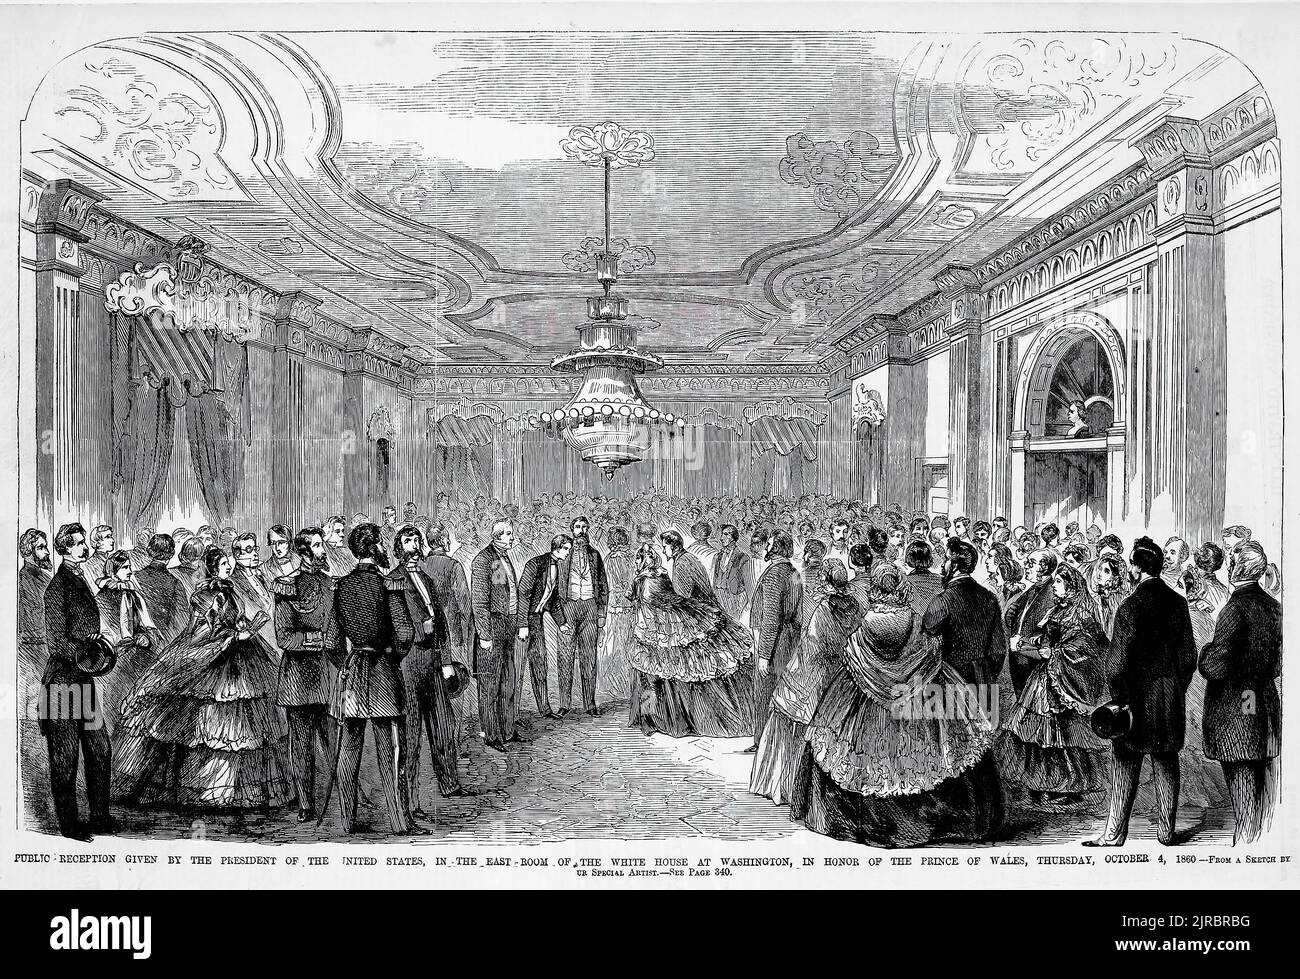 Public reception given by the President of the United States, in the East Room of the White House at Washington, in honor of the Prince of Wales, October 4th, 1860. Visit of the Prince of Wales, Edward Albert, to America. 19th century illustration from Frank Leslie's Illustrated Newspaper Stock Photo